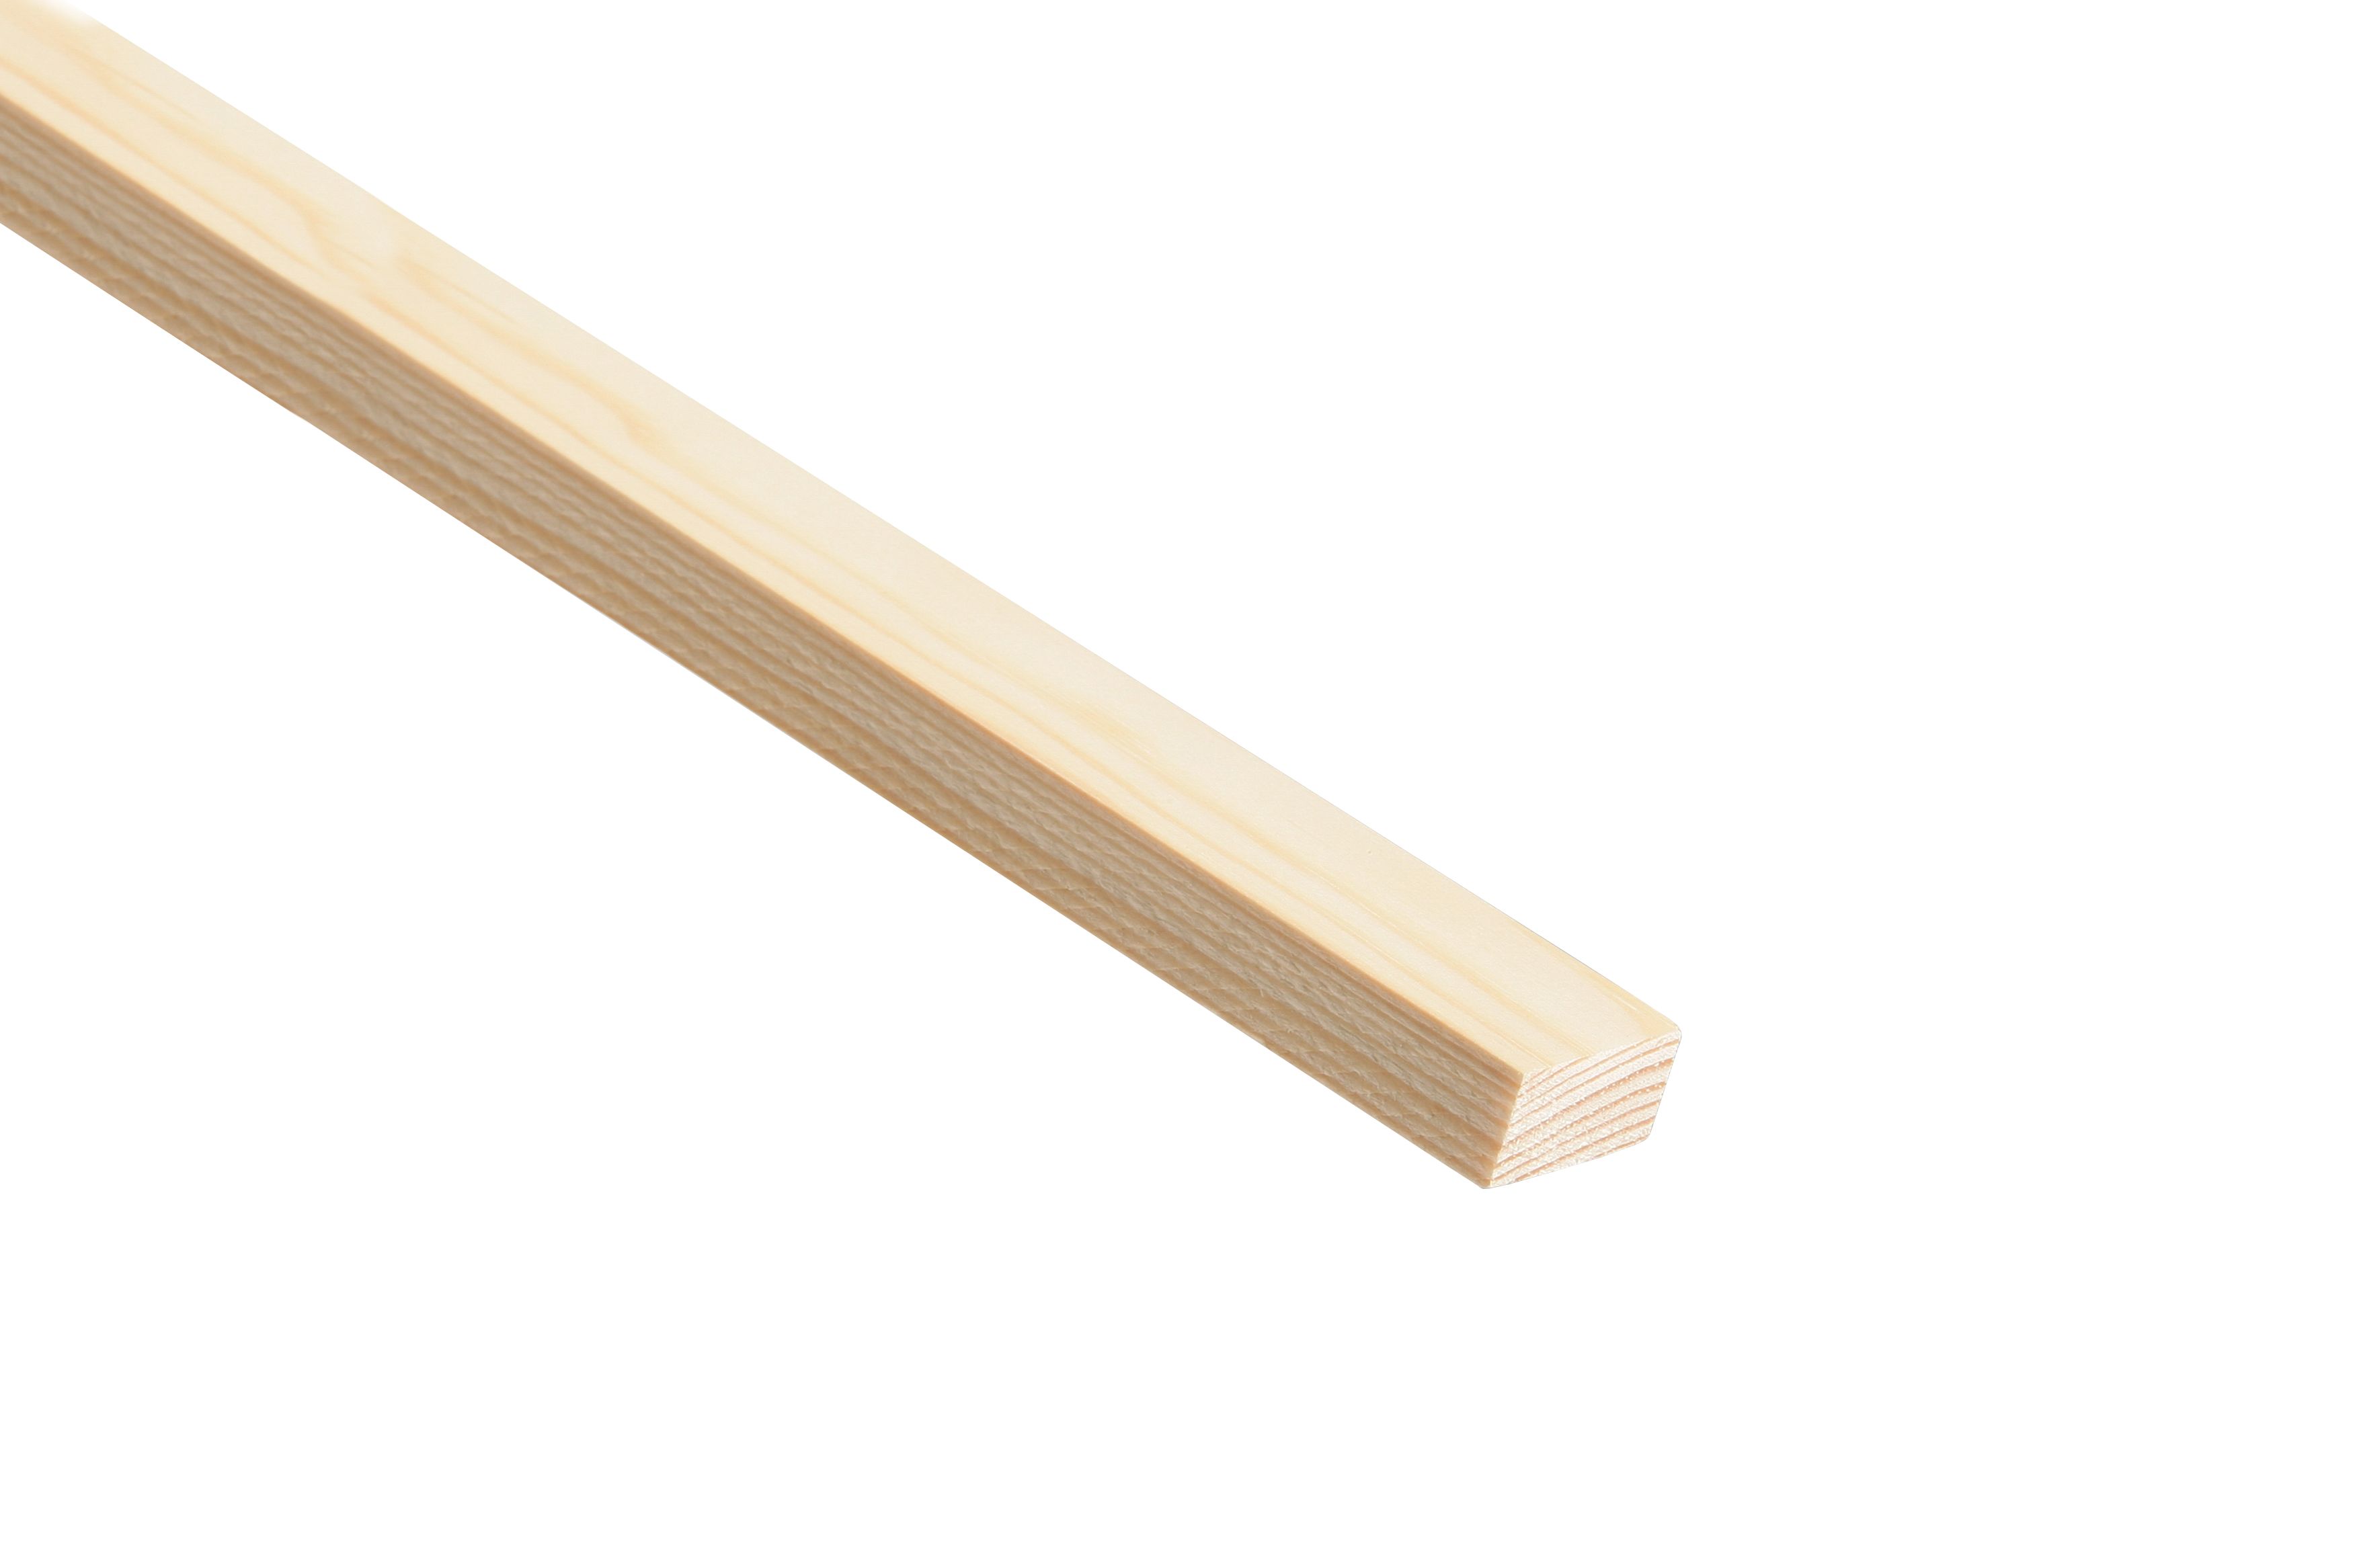 Image of Wickes Pine Stripwood Moulding (PSE) - 10 x 18 x 2400mm